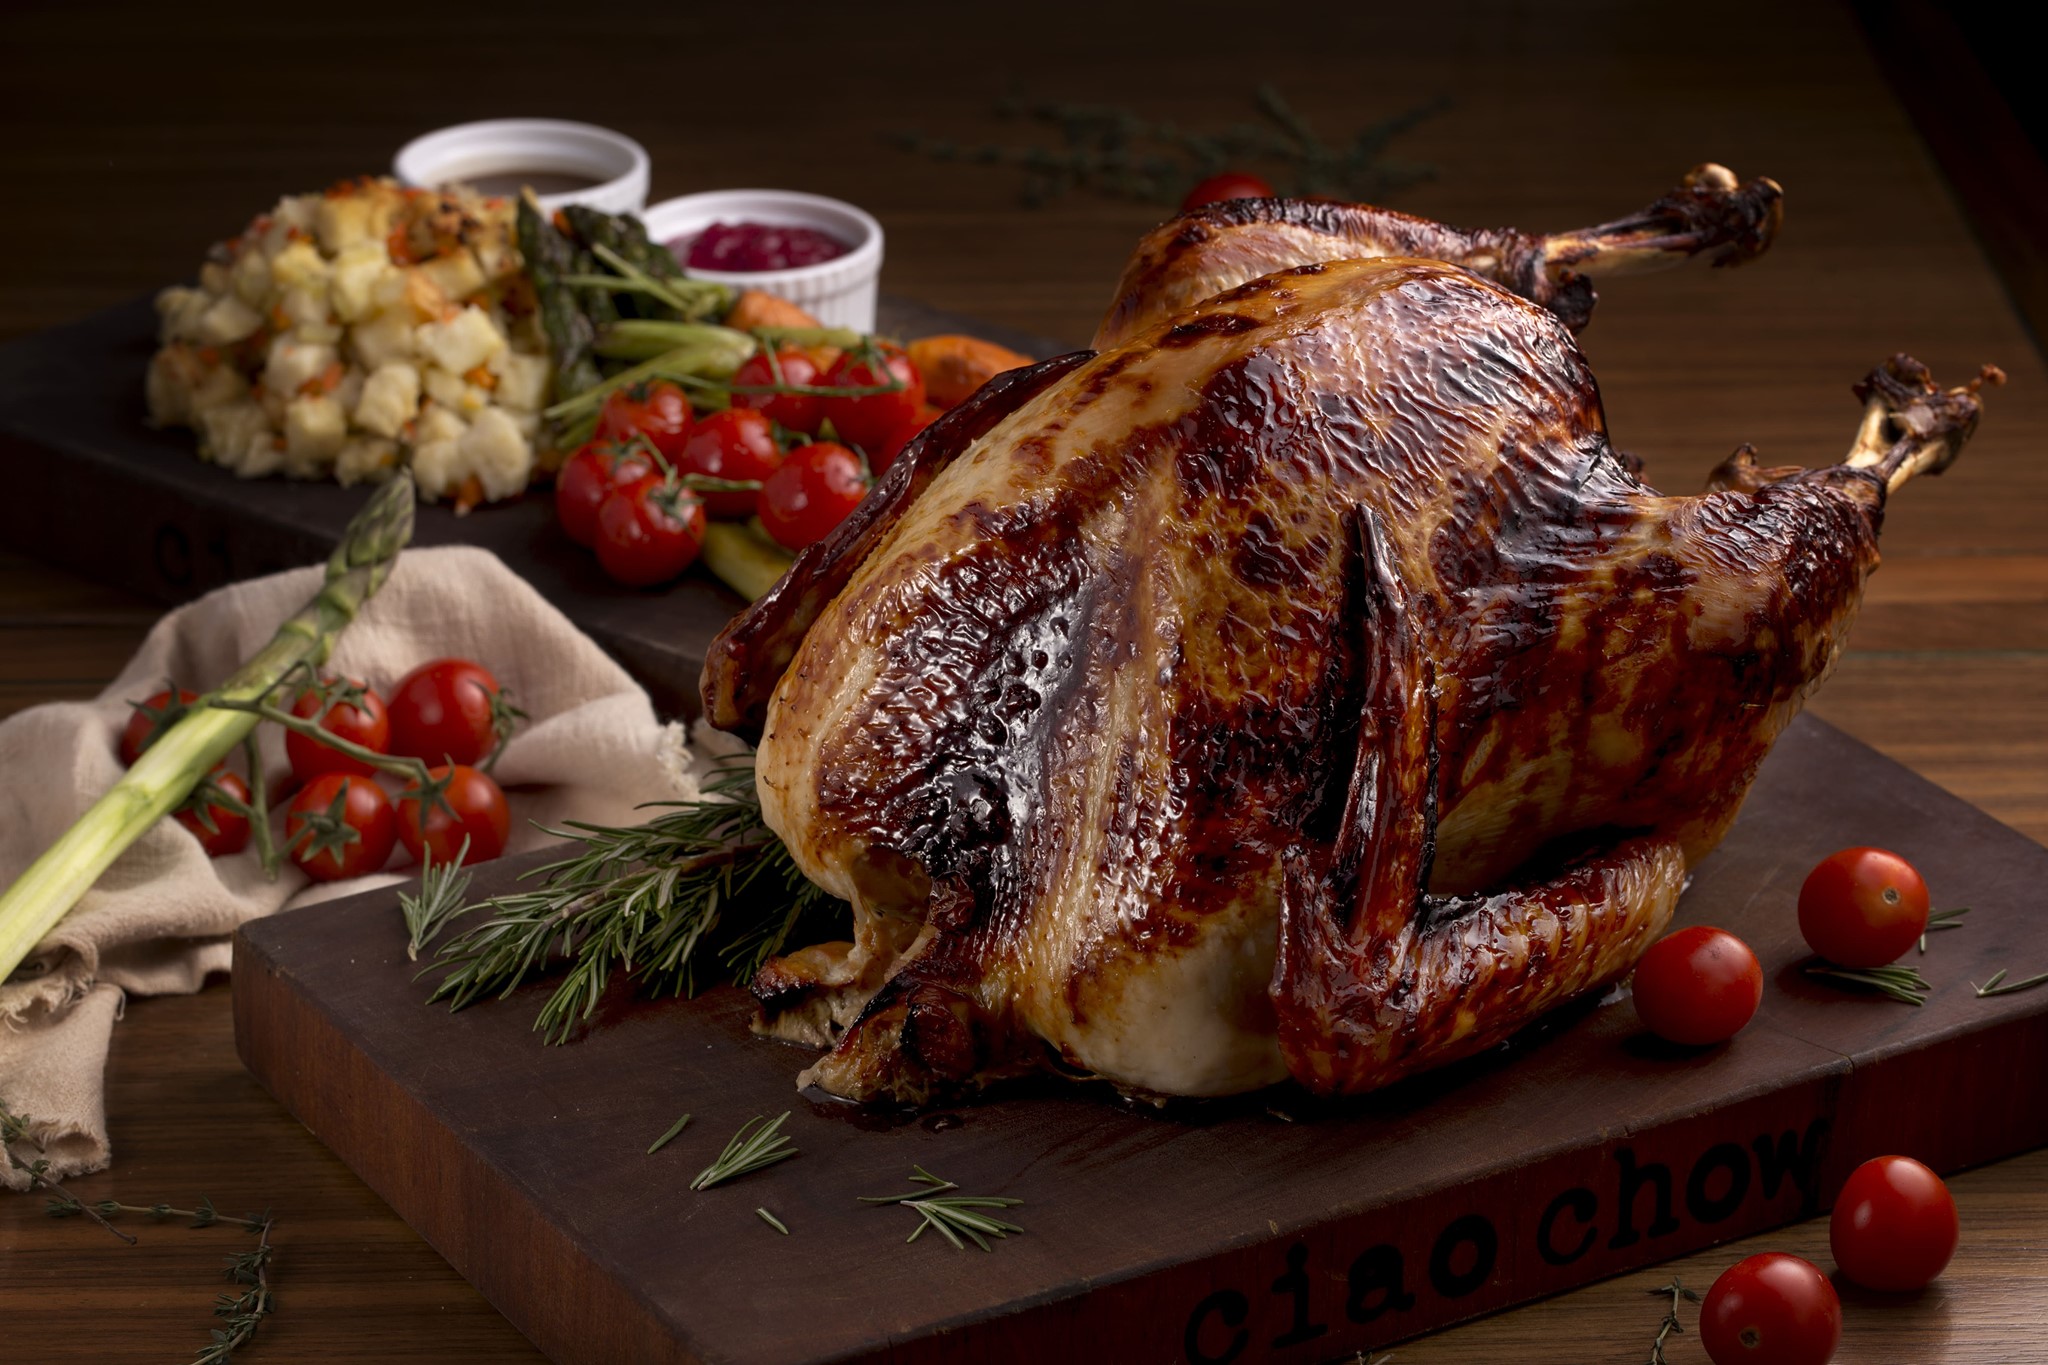 Let's celebrate Thanksgiving! You'll certainly be grateful for a slow-roasted turkey, complete with house-made traditional sides; including mashed sweet potato, seared brussels sprouts, roast carrots, asparagus with cherry tomatoes, cranberry sauce and turkey jus gravy. Available from 28-30 November 2019.... Order as individual portions or to share: 